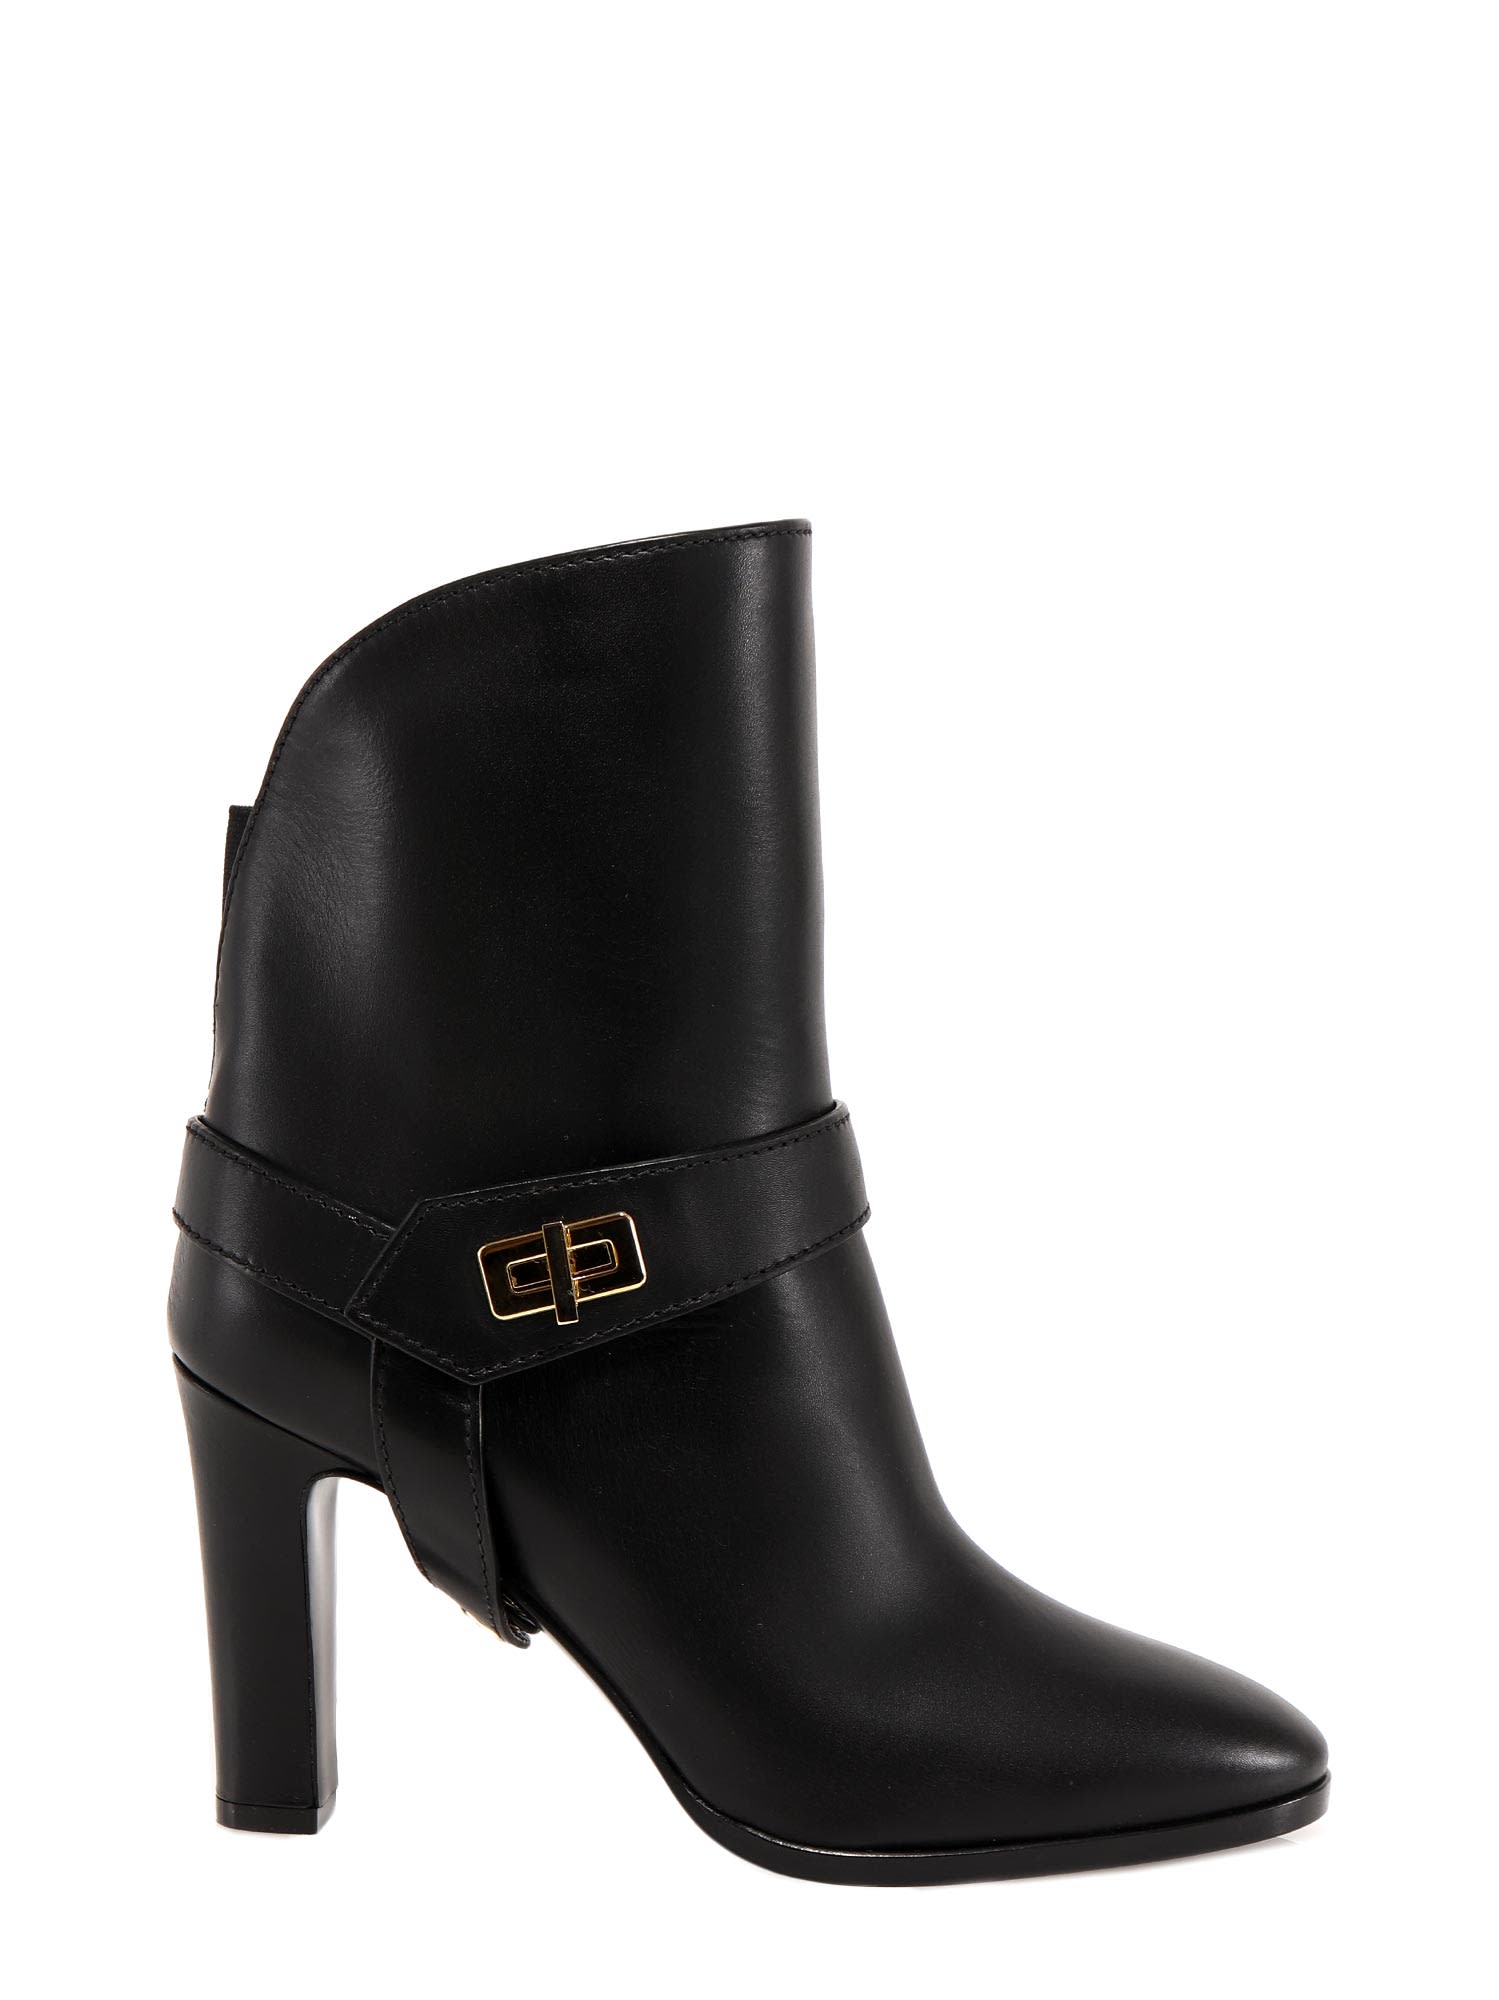 Buy Givenchy Eden Ankle Boots online, shop Givenchy shoes with free shipping